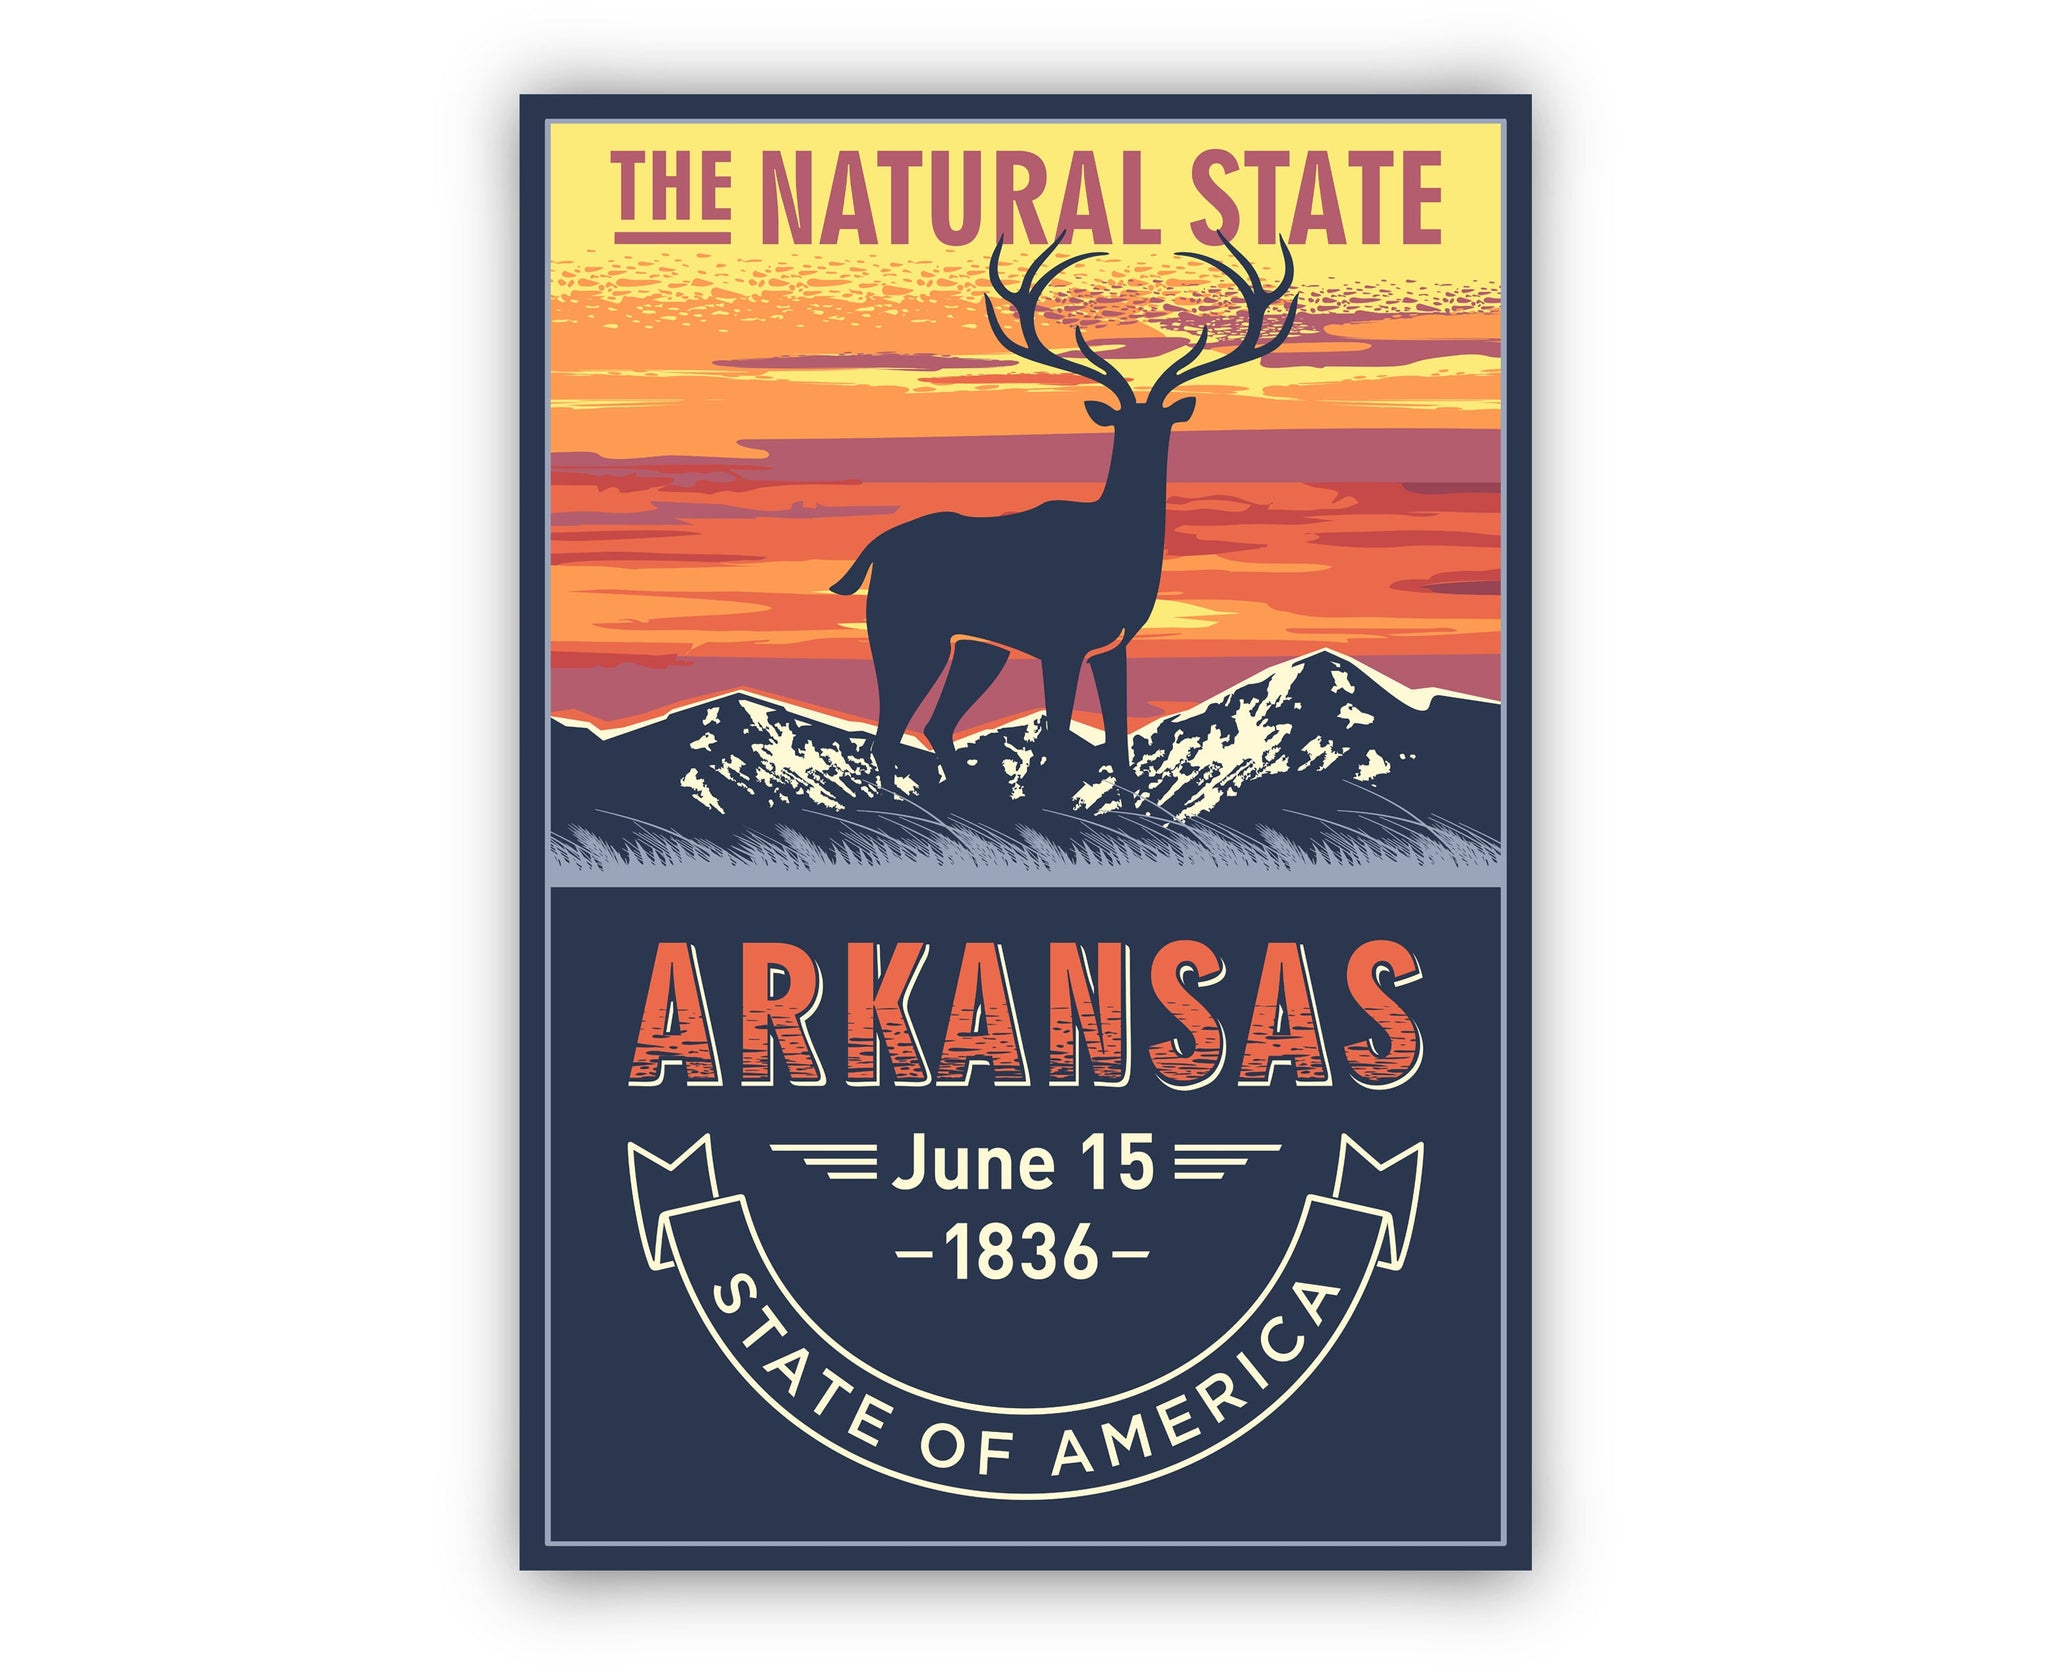 United States Arkansas State Poster, Arkansas Poster Print, Arkansas State Emblem Poster, Retro Travel State Poster, Home, Office Wall Art